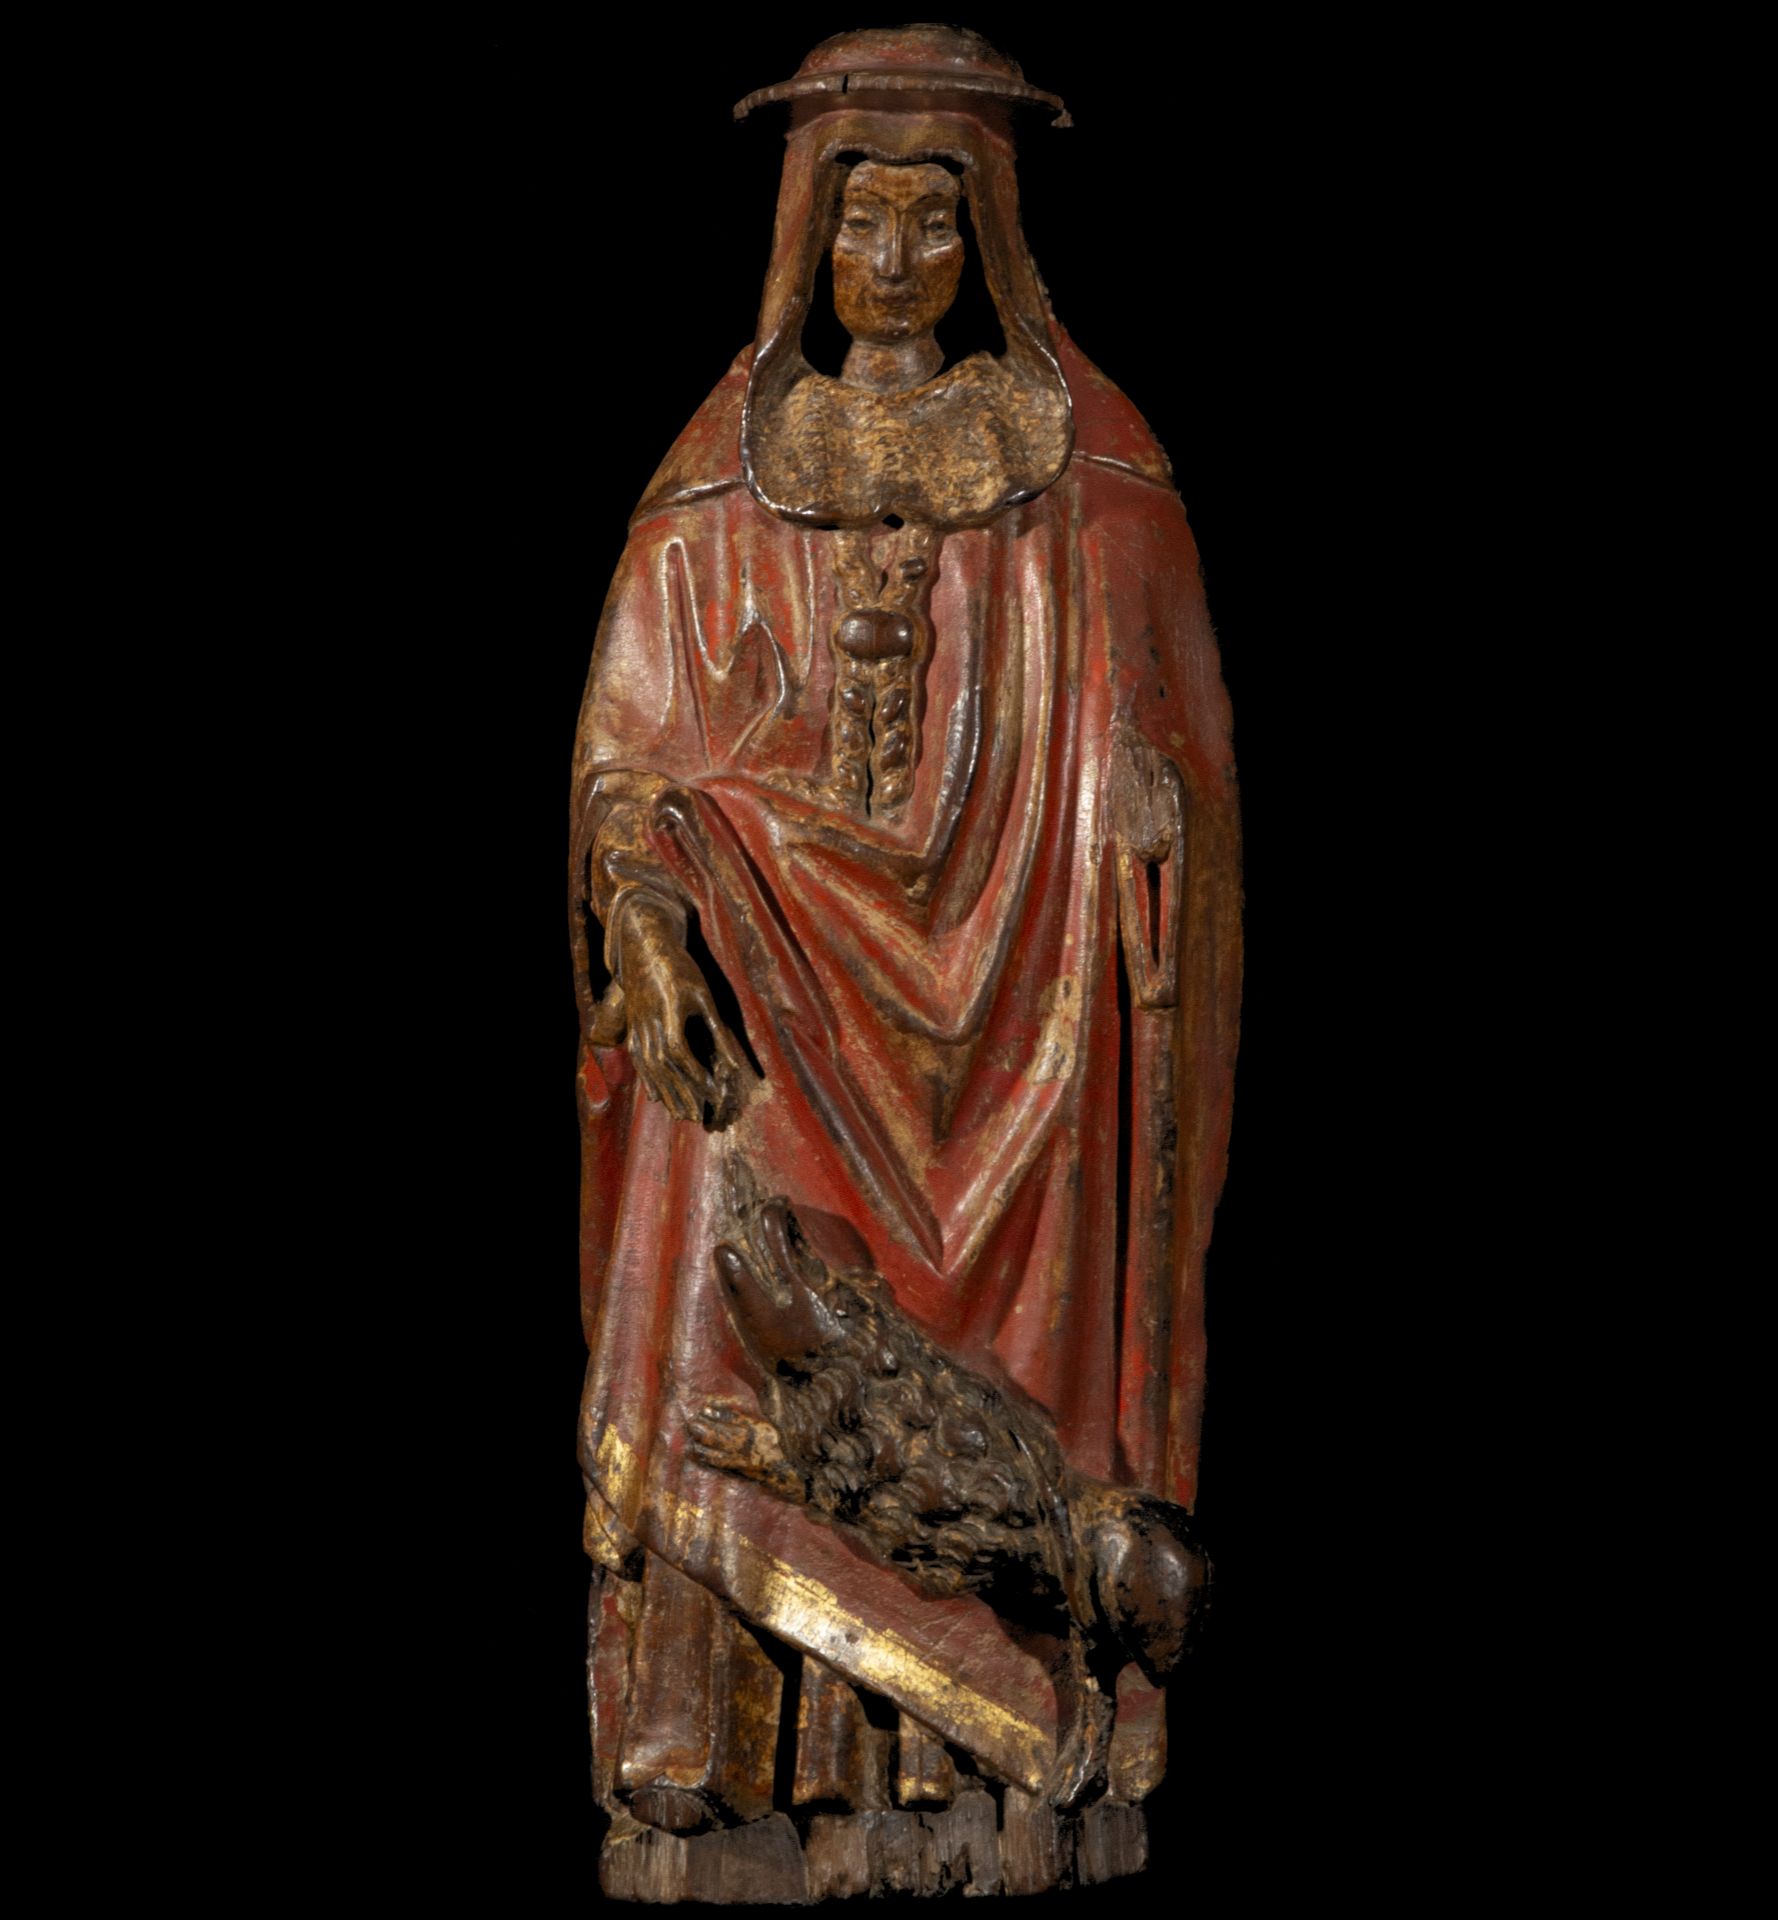 Spectacular Gothic Carving from Mechelen of Cardenal from the 15th century, with original polychrome